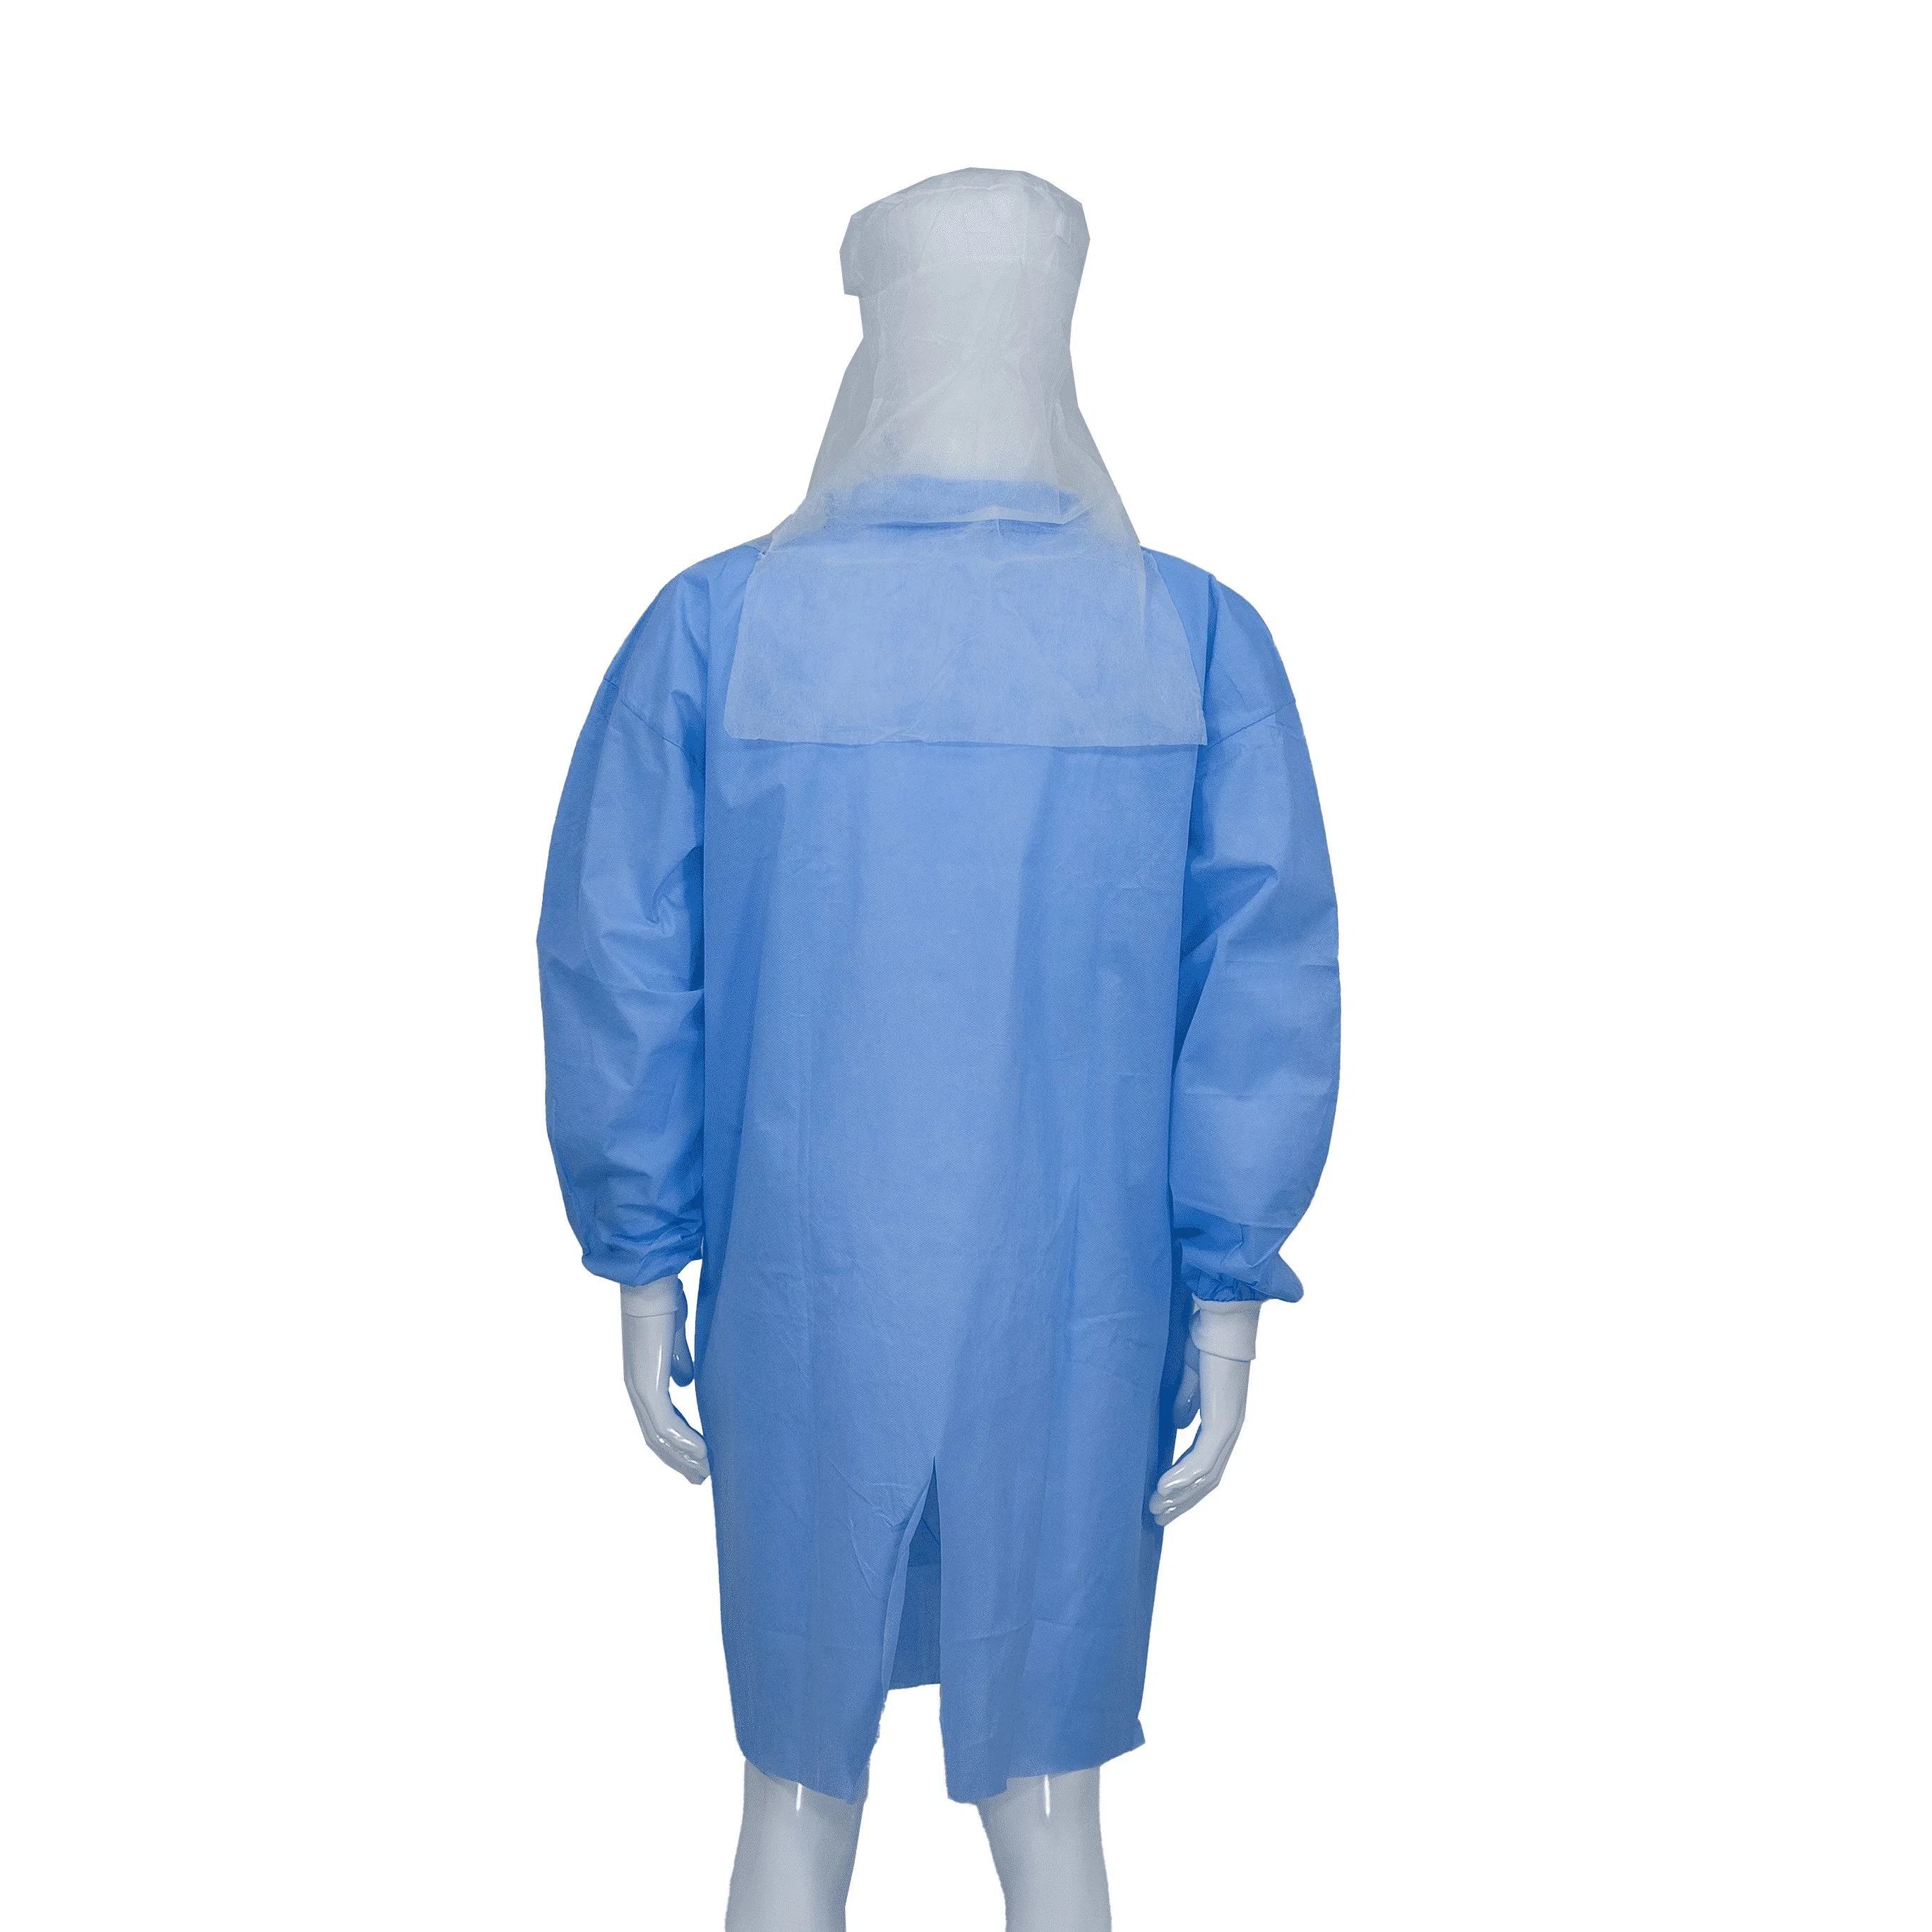 Snaps Closure Disposable PP/SMS Lab Coat Factory/Food Industry Durable Use Adult Size No-Reuse Work Clothes Long Sleeves Dust Coat